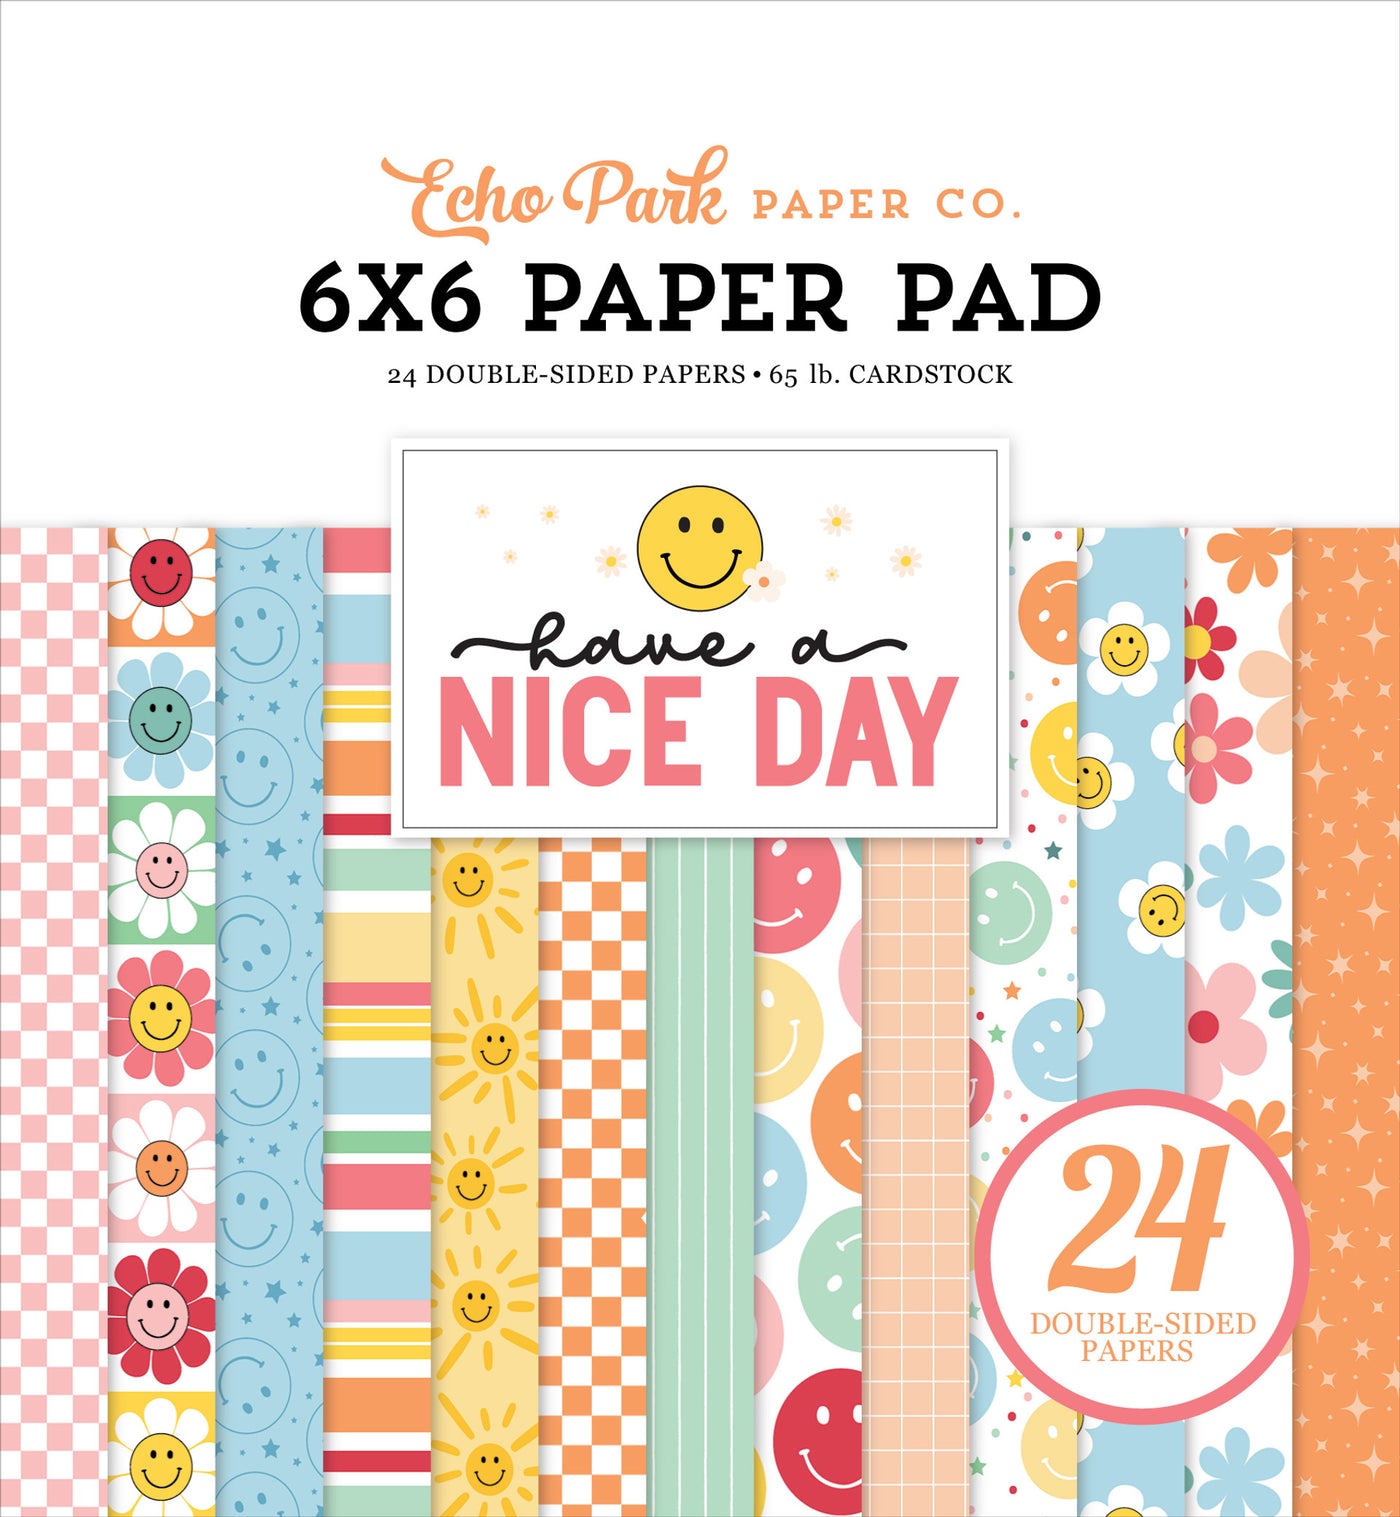 The 6x6 pad features cute designs and colors, all with a retro theme! Fun for cards and papercrafts. Includes 24 double-sided pages.